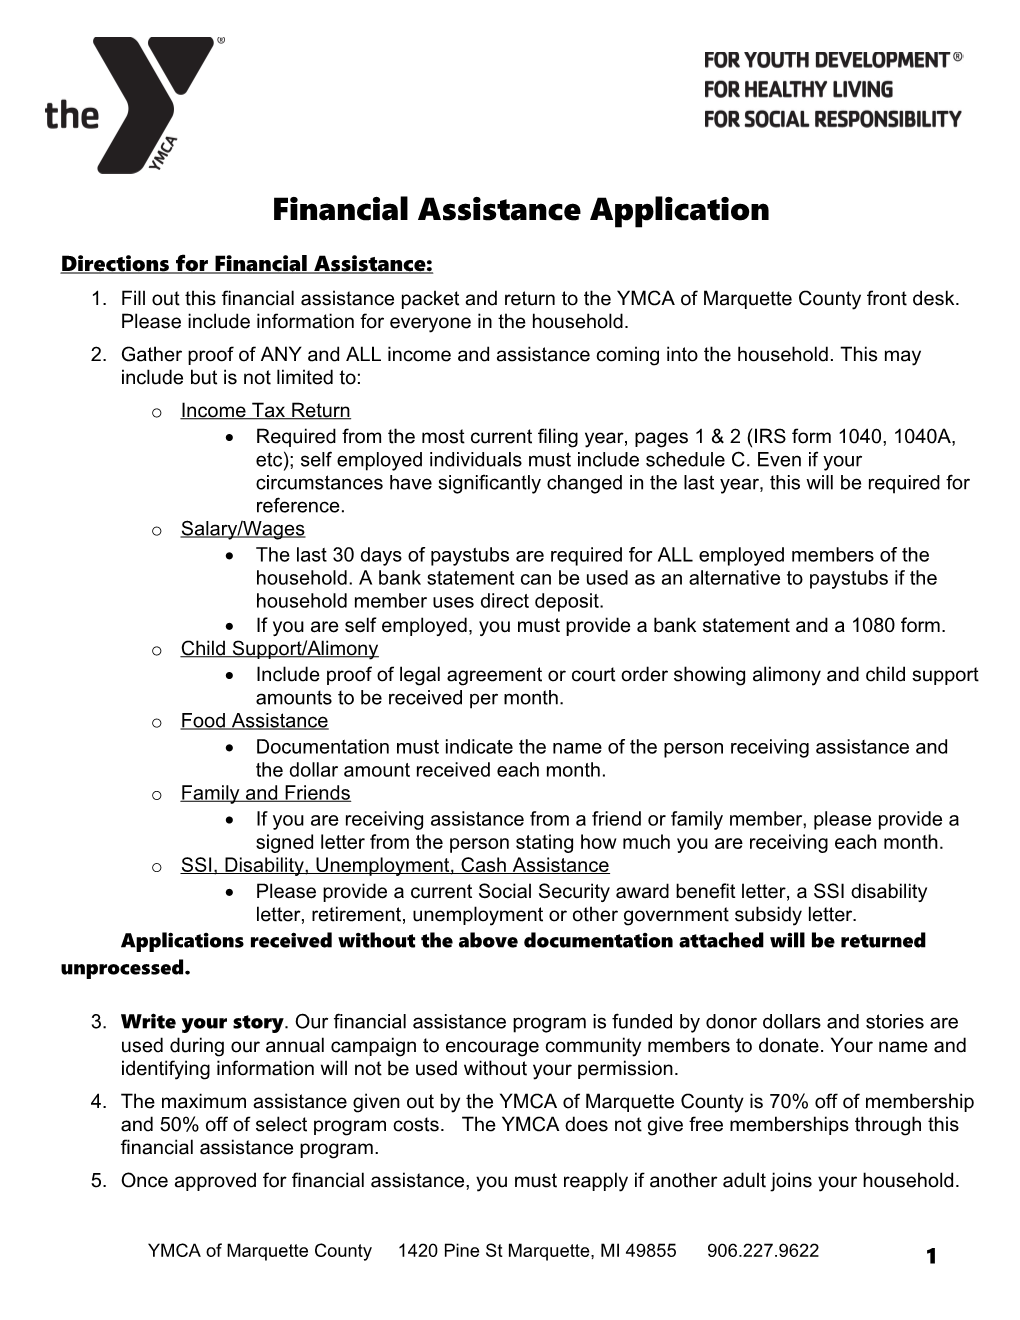 Directions for Financial Assistance